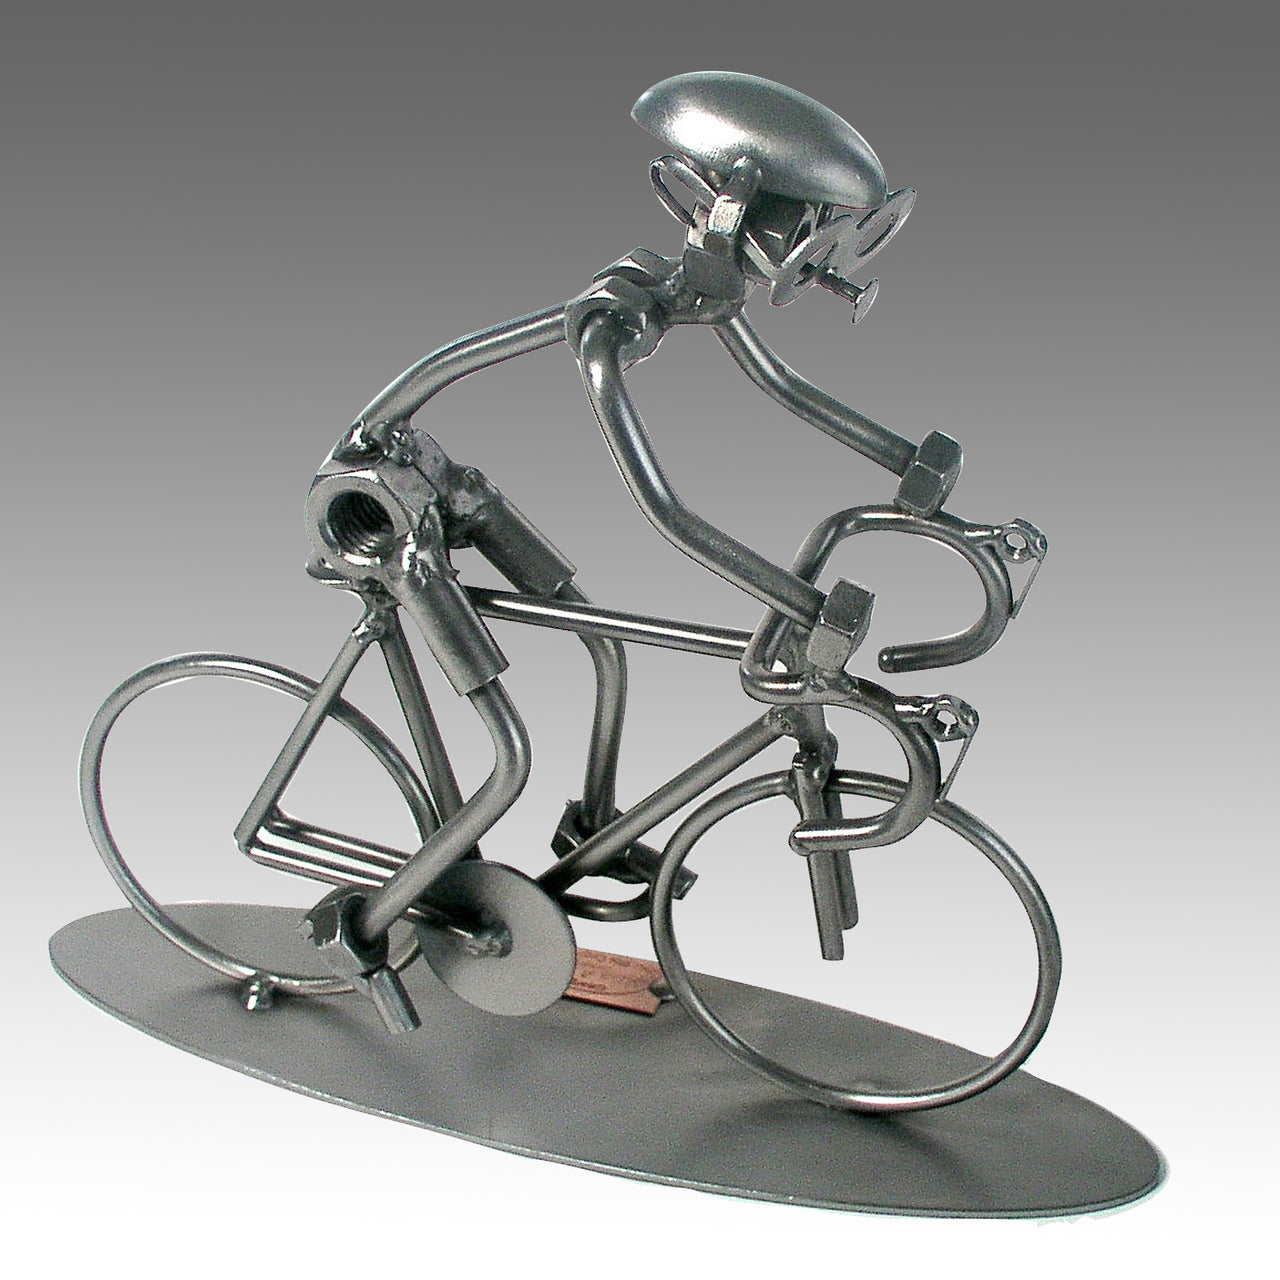 Bike Racing Nuts and Bolts Sculpture